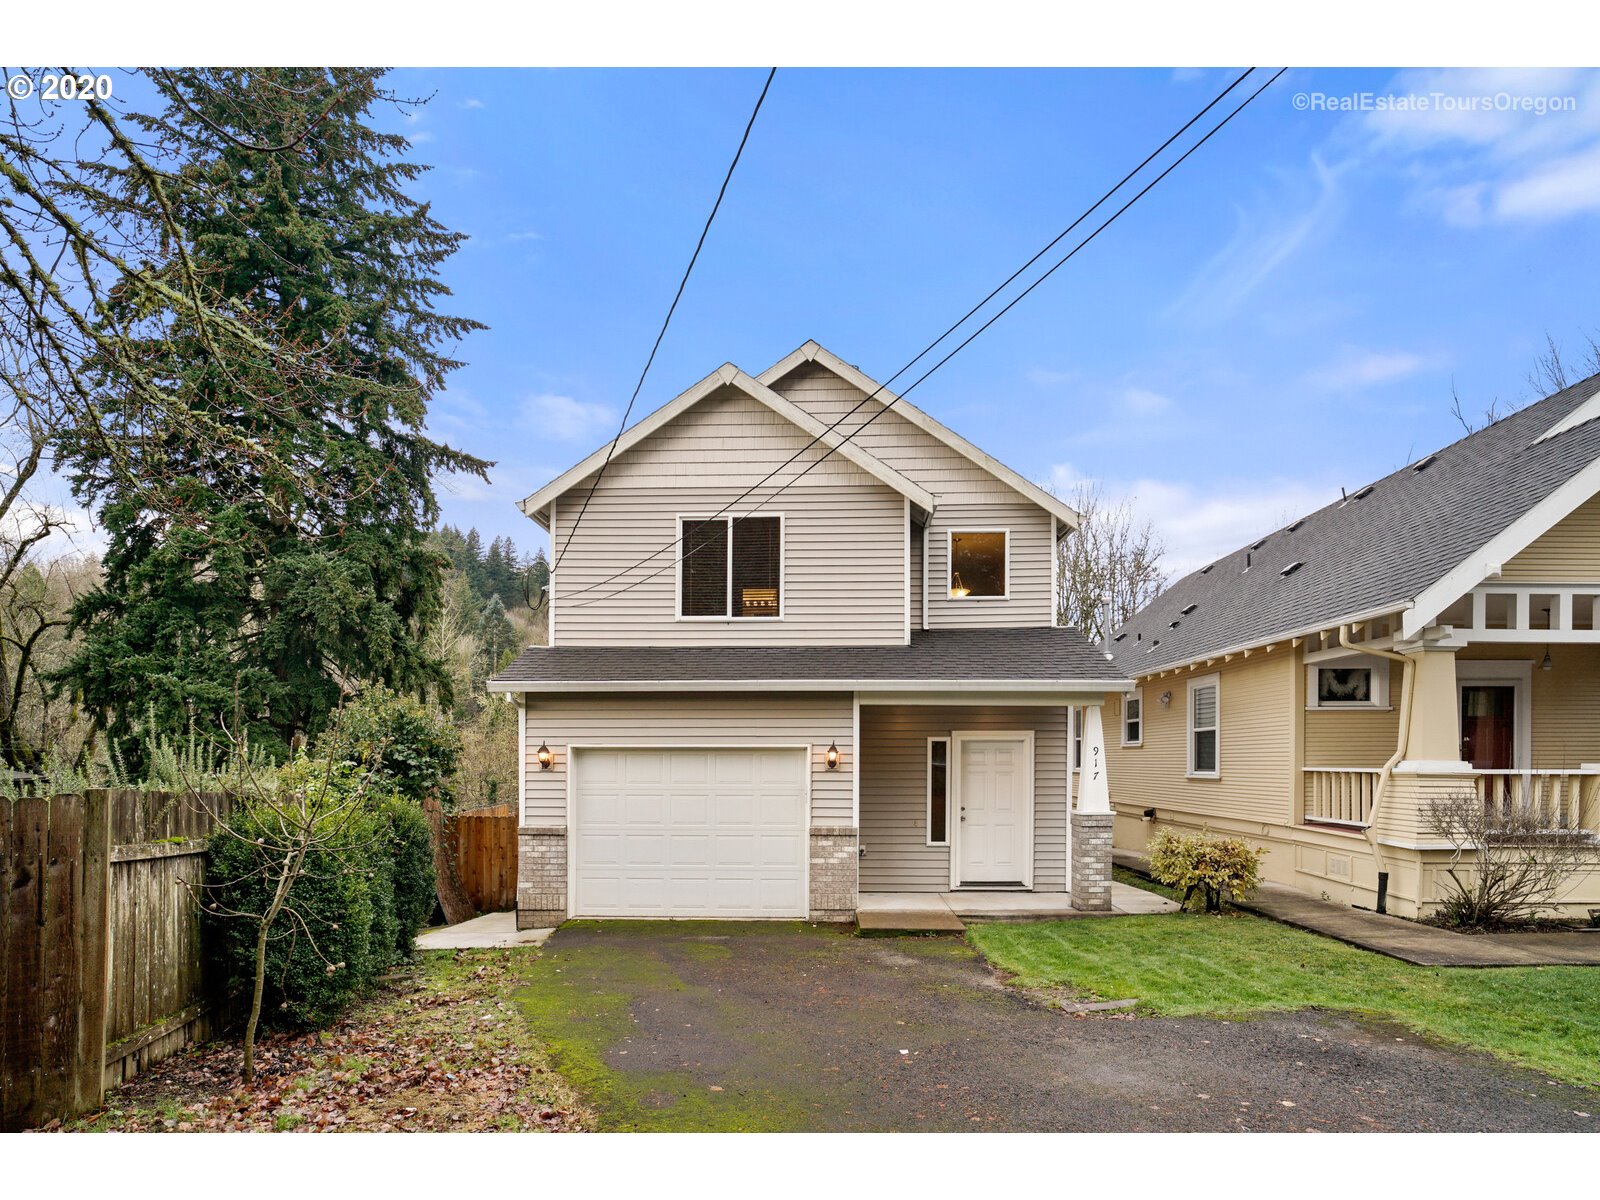 917 SE ROBERTS AVE (1 of 32)